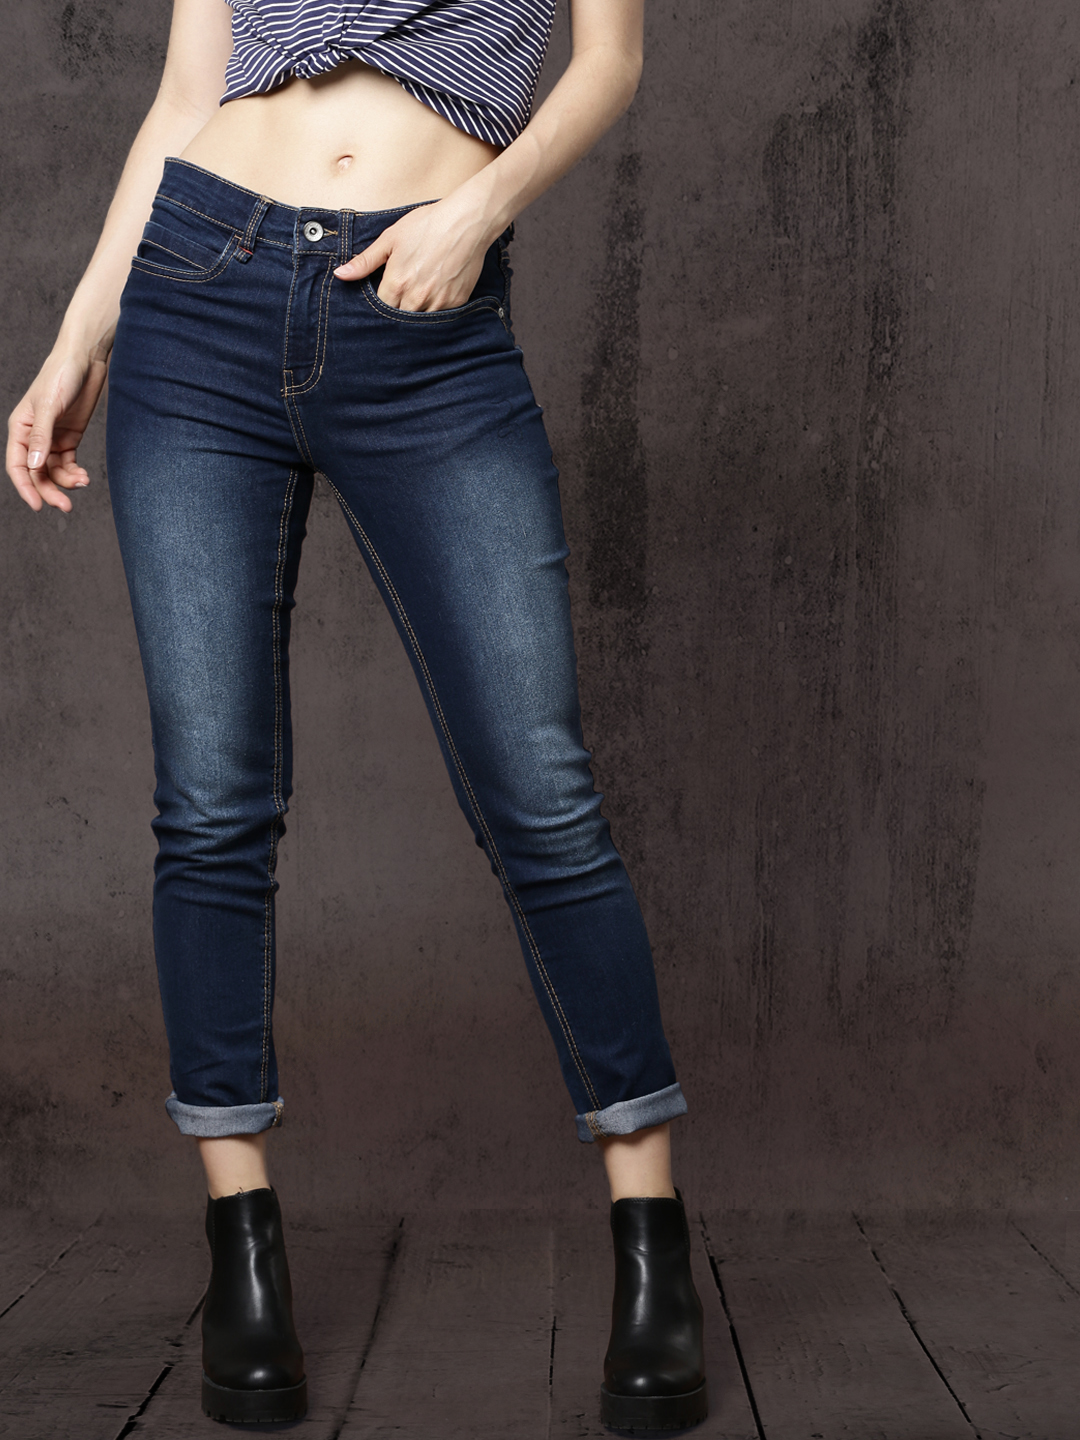 roadster jeans price